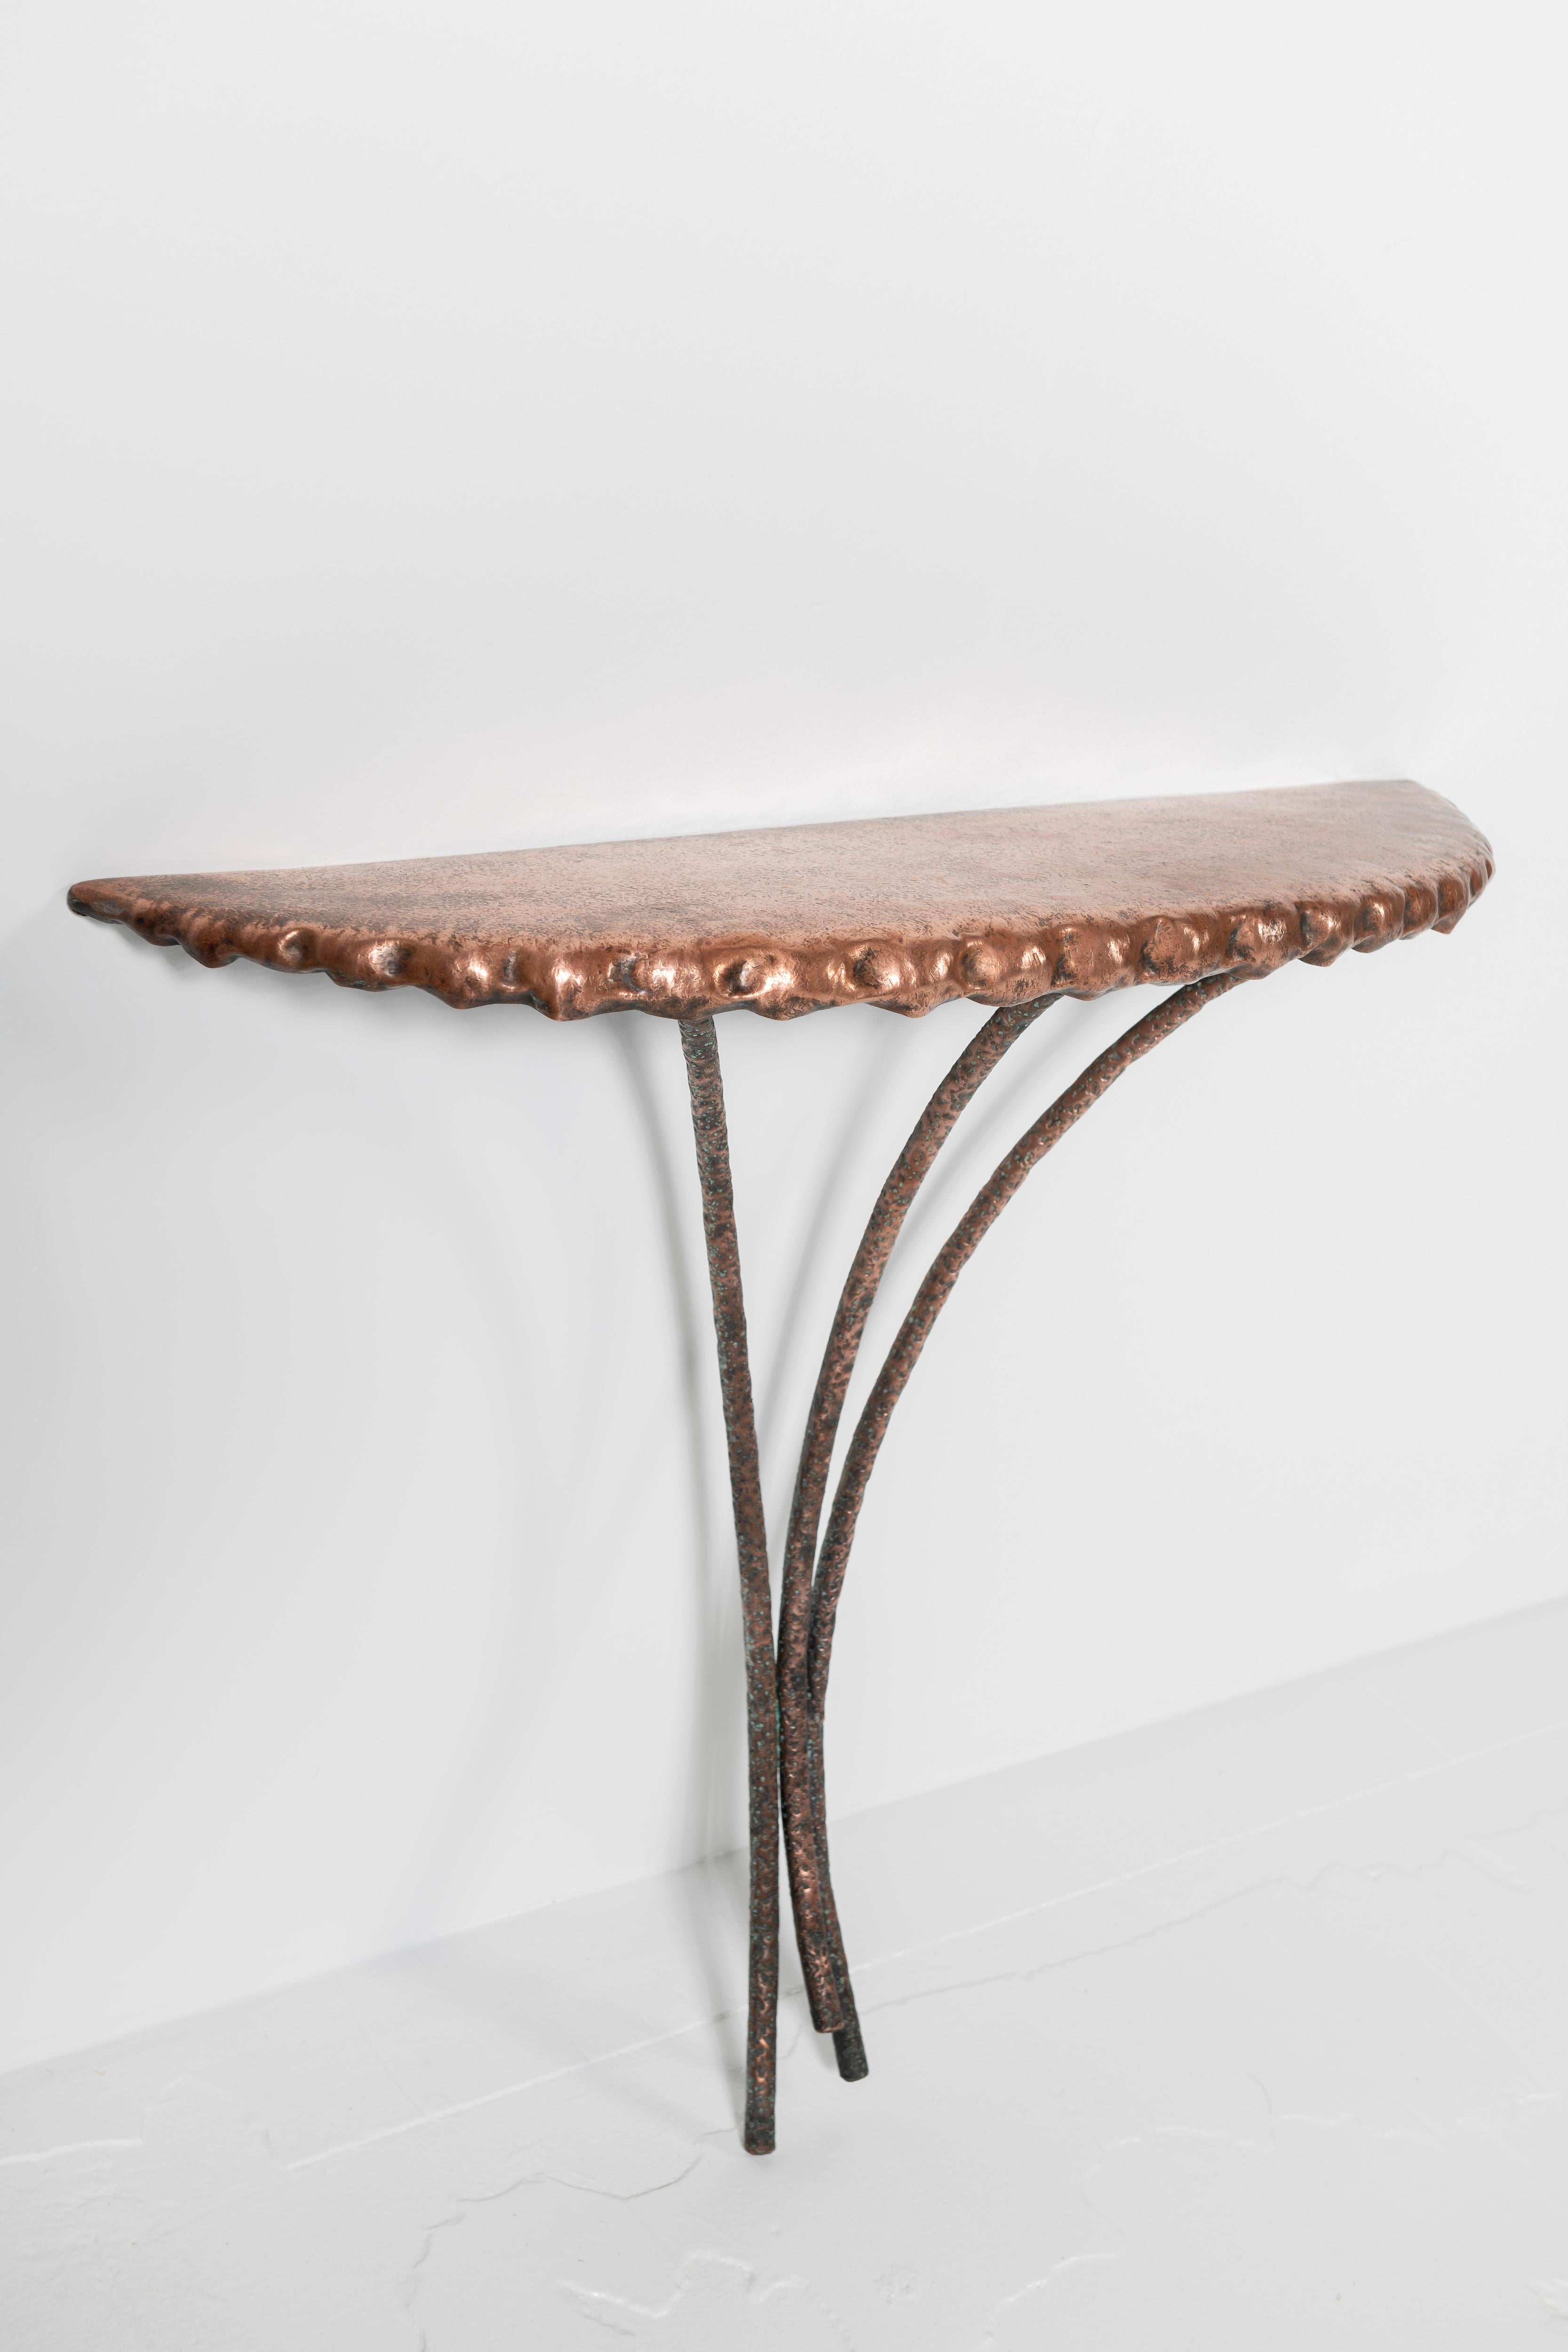 20th Century Hammered Copper Console by Angelo Bragalini 1955 For Sale